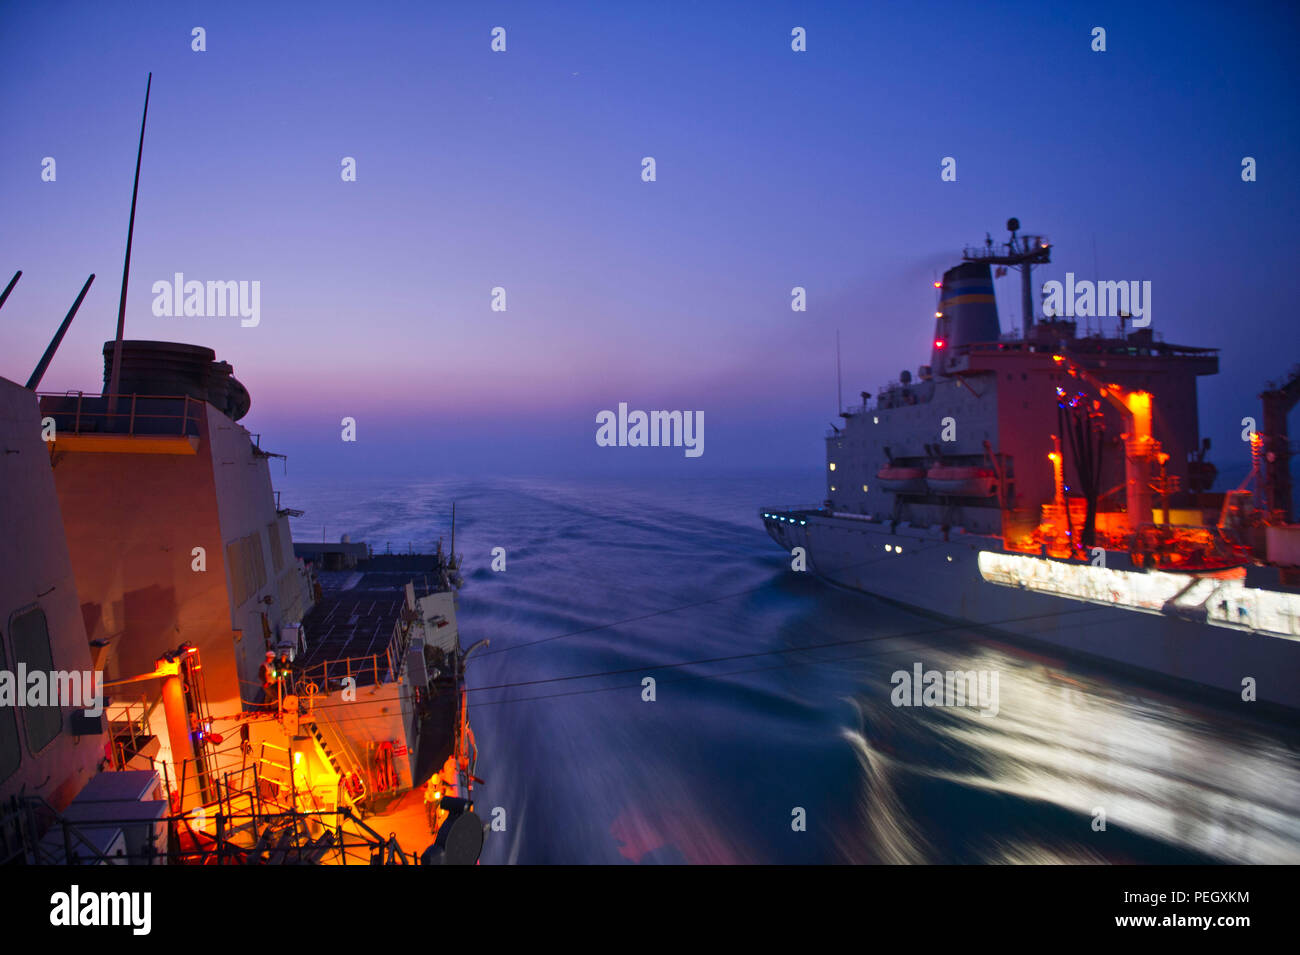 150818-N-KU391-145 ARABIAN GULF, at sea (August 18, 2015) – Sailors aboard the Arleigh Burke-class guided missile destroyer USS Winston S. Churchill (DDG 81) conduct an underway replenishment with the Military Sealift Command’s Fleet Replenishment Oiler USNS Patuxent (T-AO-201). Churchill is deployed in the U.S. 5th Fleet area of operations supporting Operation Inherent Resolve, strike operations and theater security cooperation efforts in the region. (U.S. Navy photo by Mass Communication Specialist 3rd Class Josh Petrosino/Released) Stock Photo